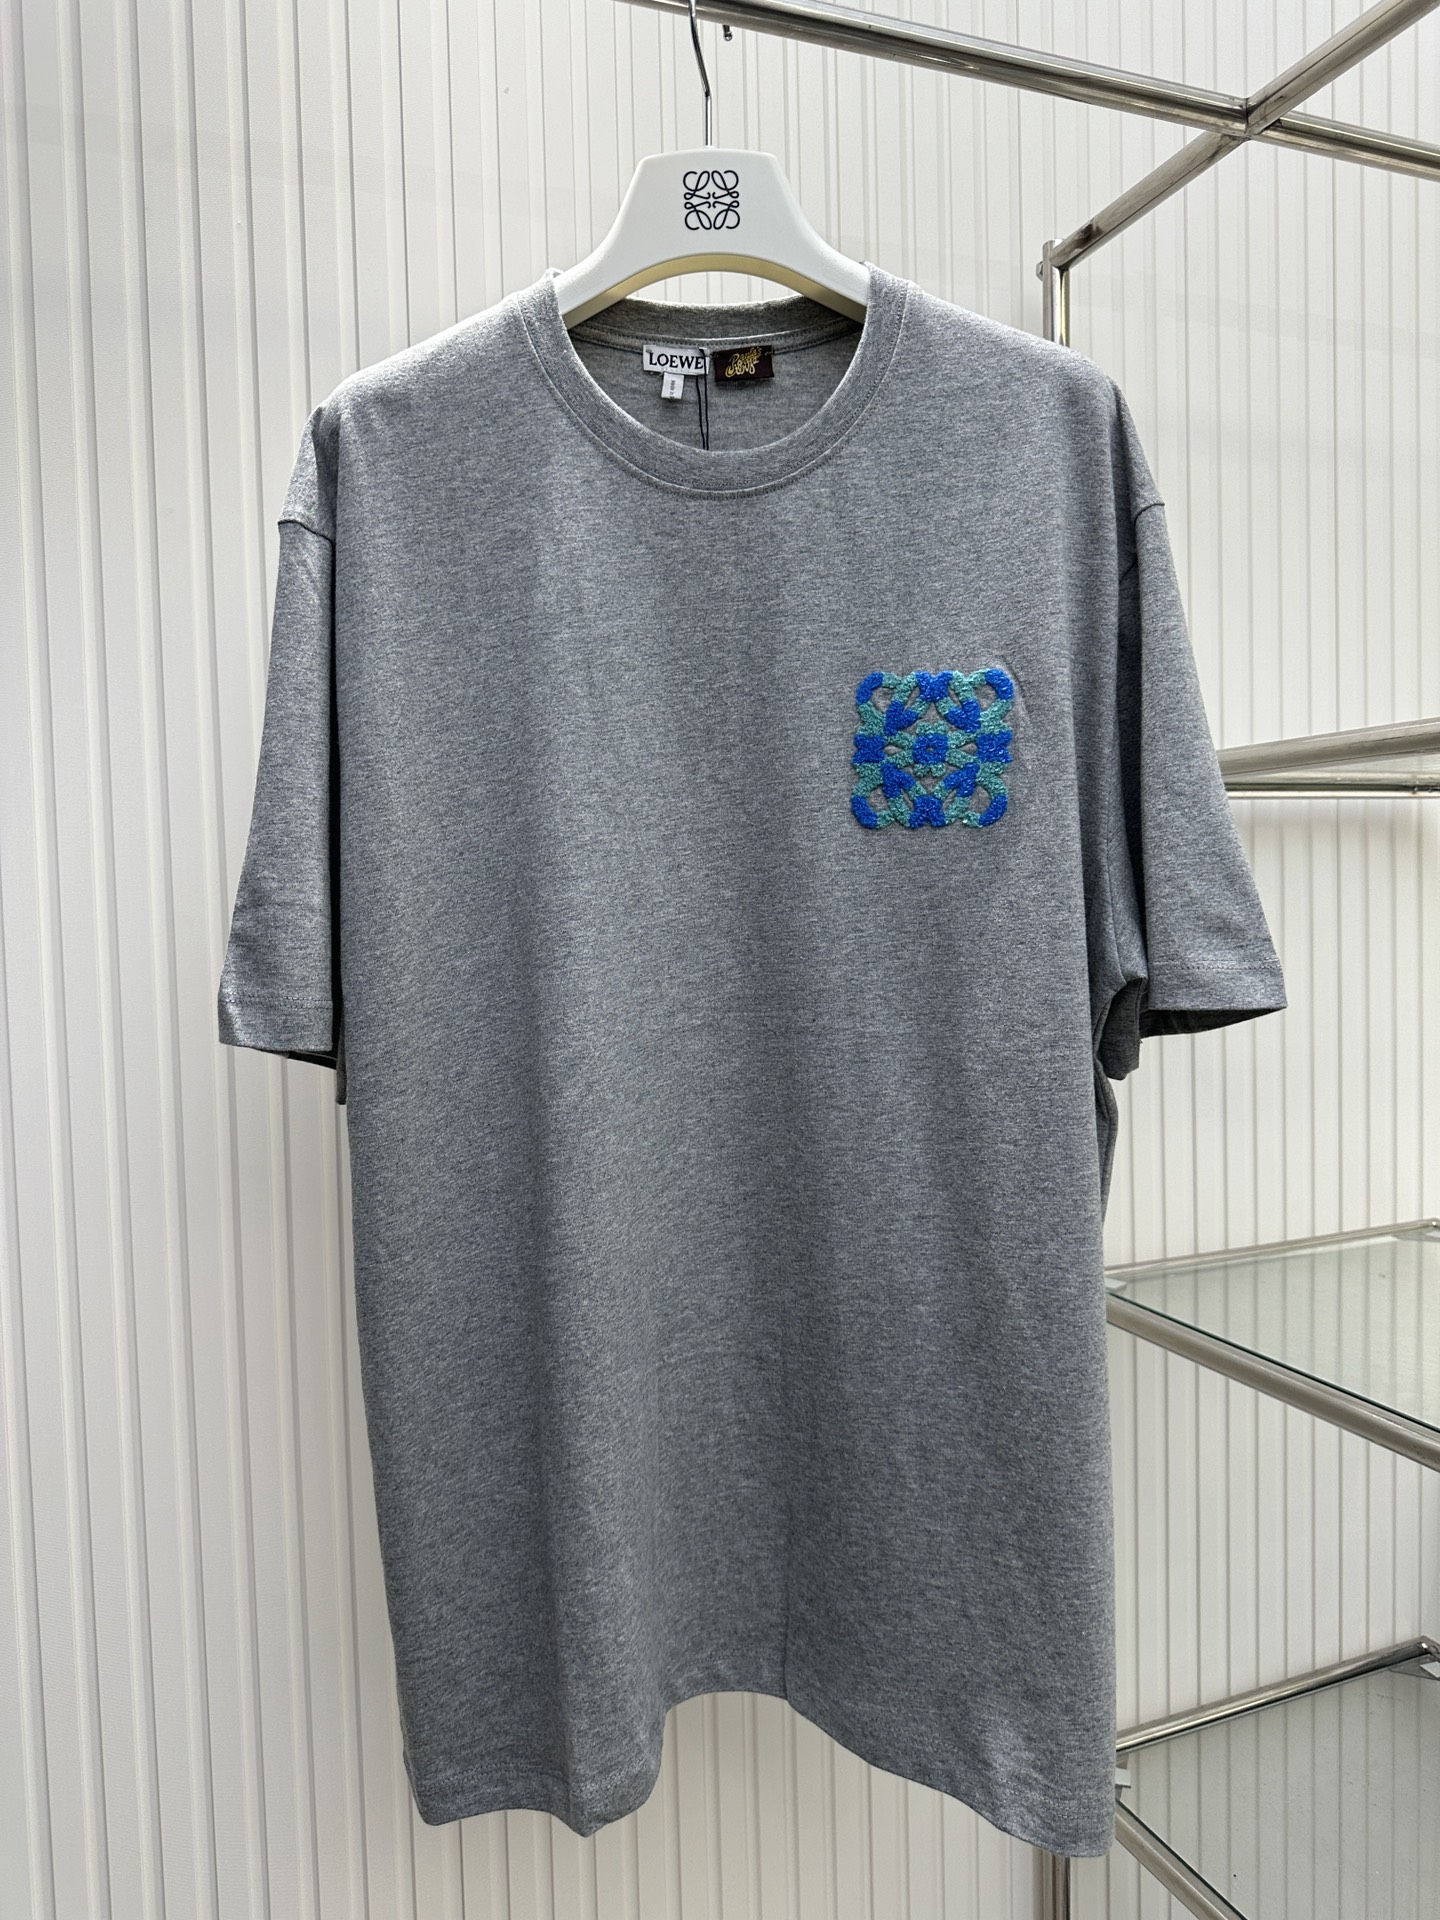 Knockoff Highest Quality
 Loewe Clothing T-Shirt Copy AAA+
 Short Sleeve